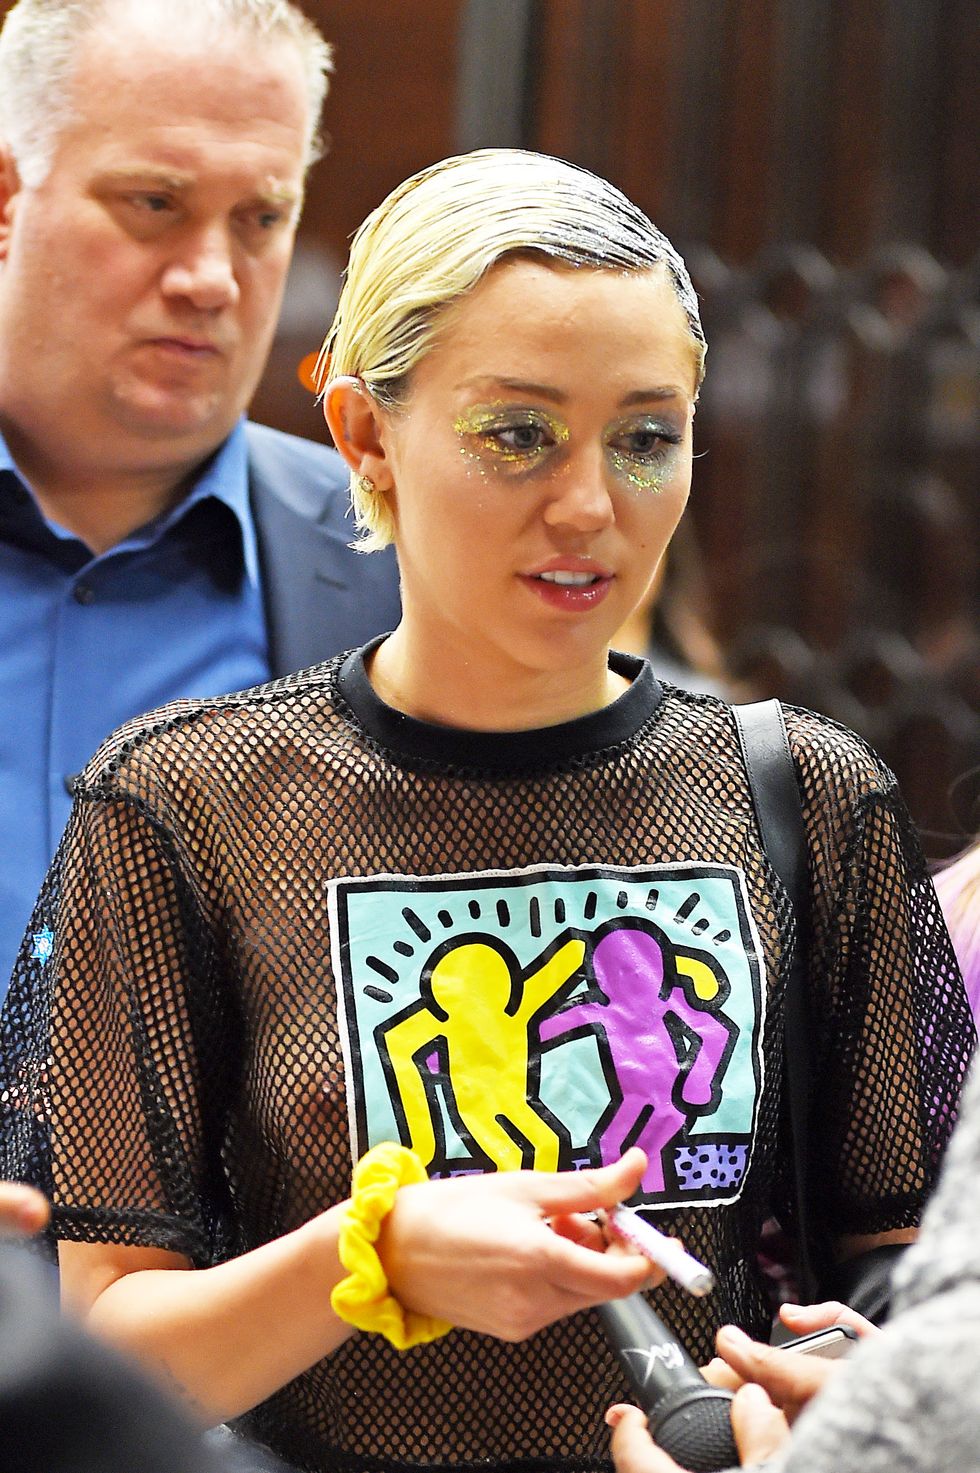 Miley Cyrus wears glitter all over her eyes